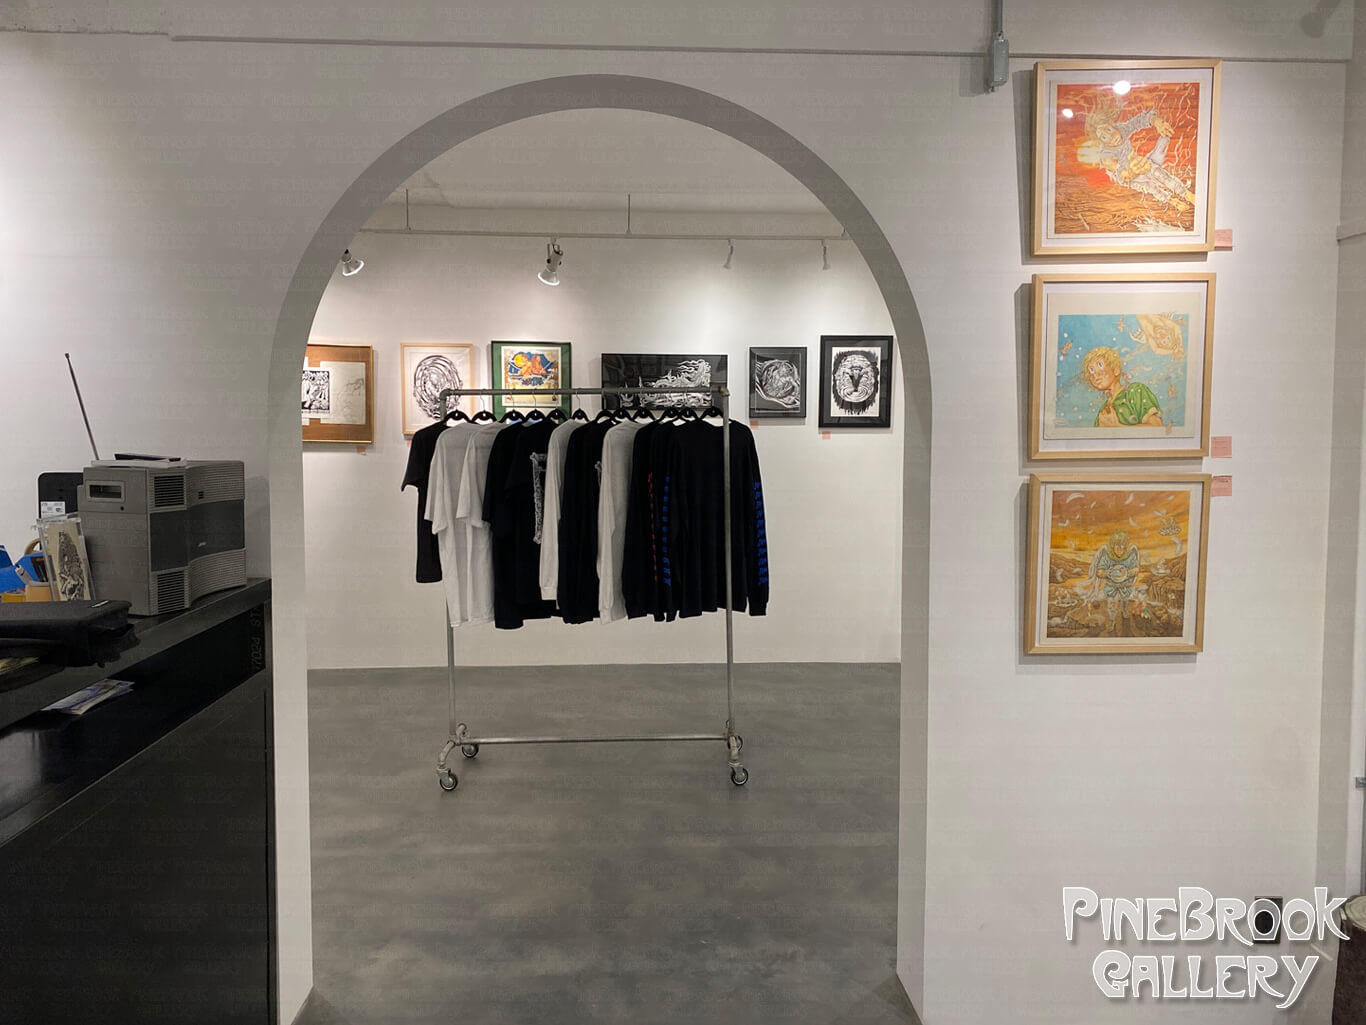 TOM原画展 at Pinebrook Gallery